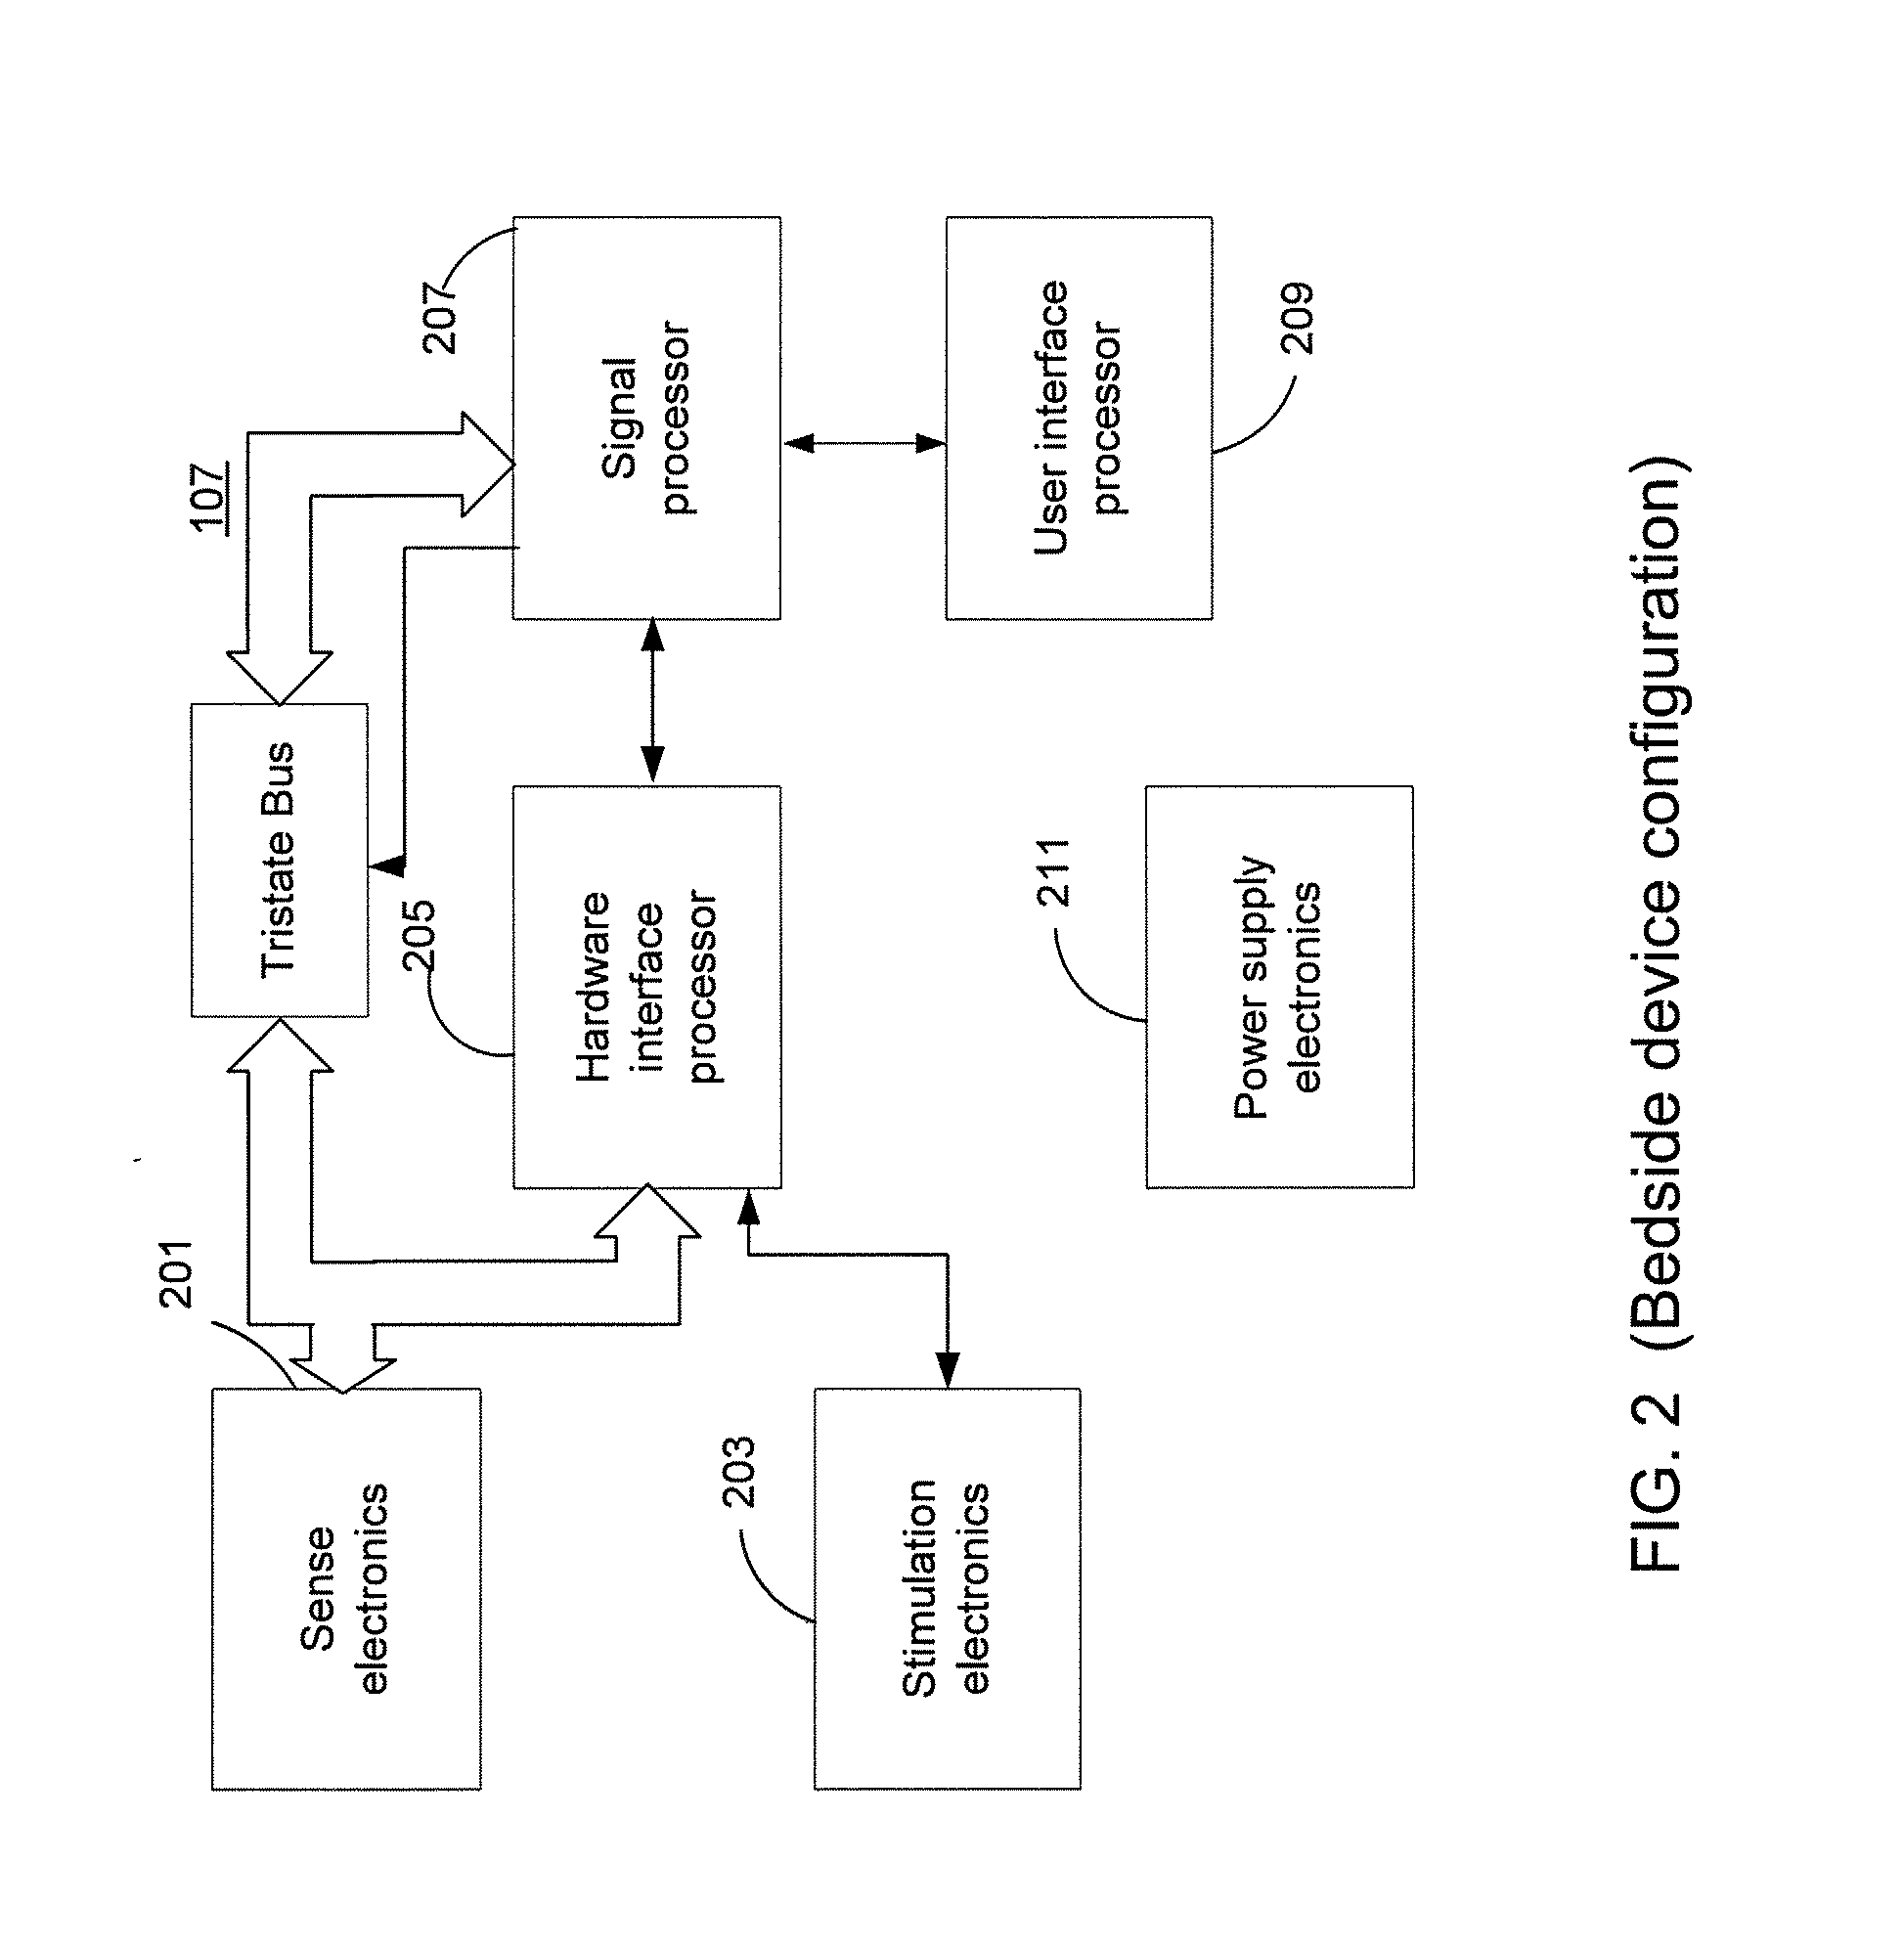 Signal Quality Monitoring And Control For A Medical Device System